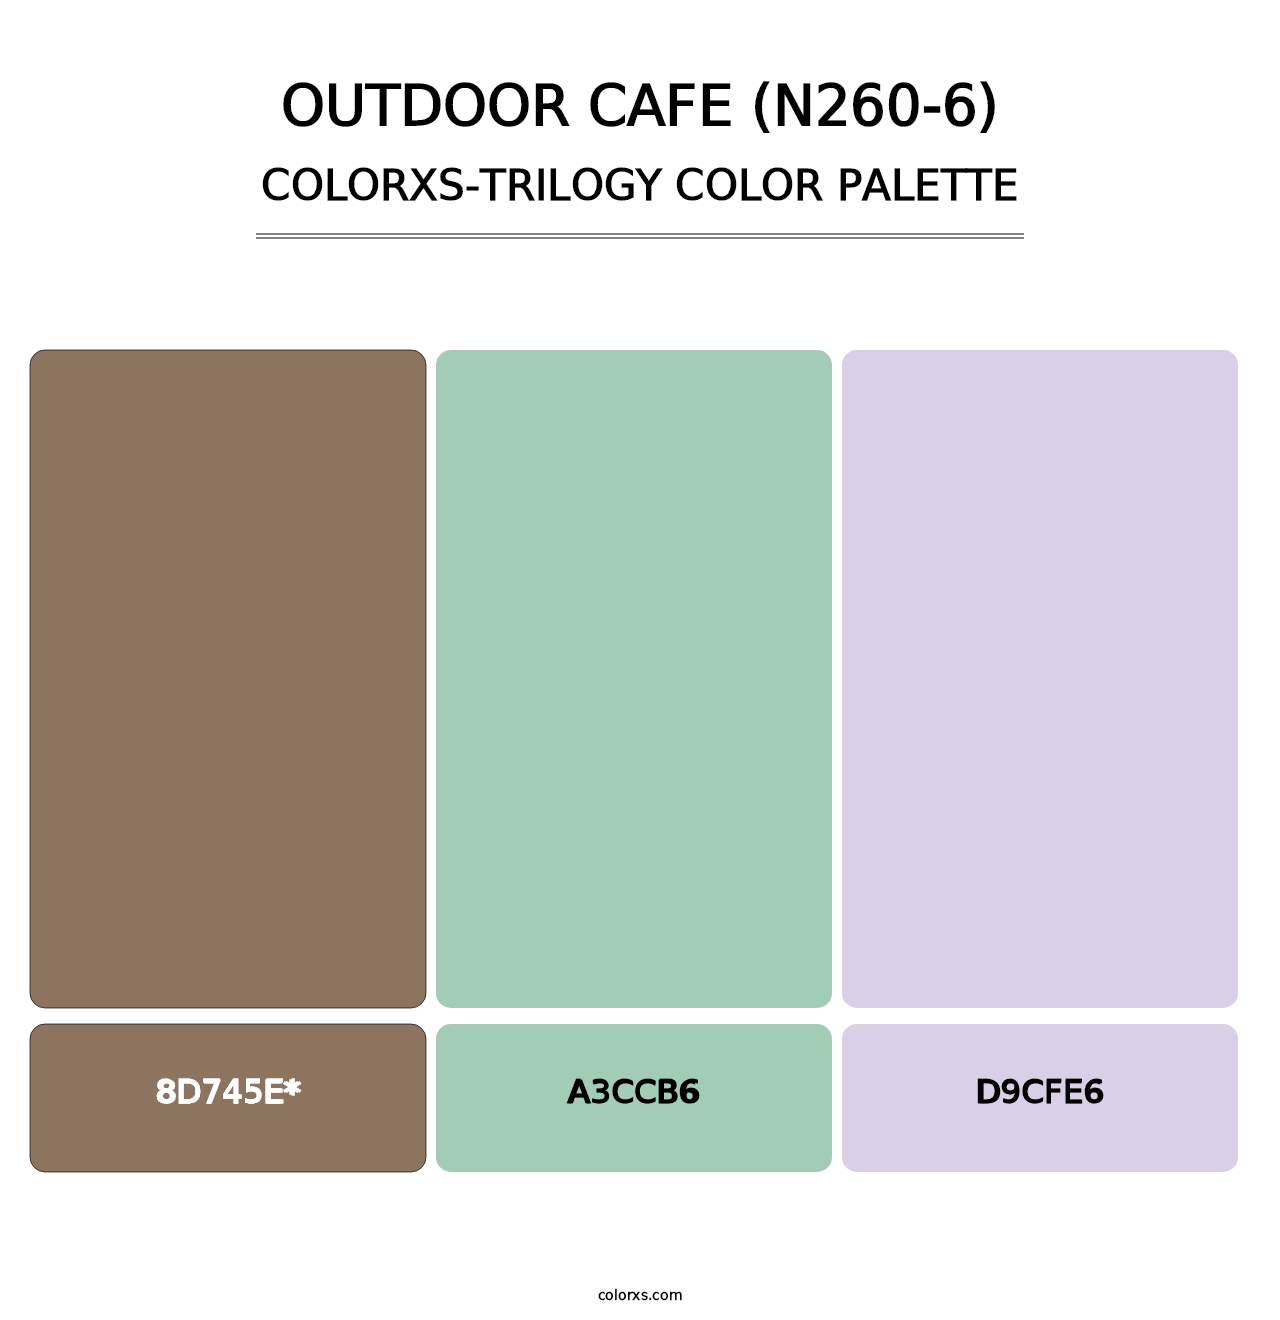 Outdoor Cafe (N260-6) - Colorxs Trilogy Palette